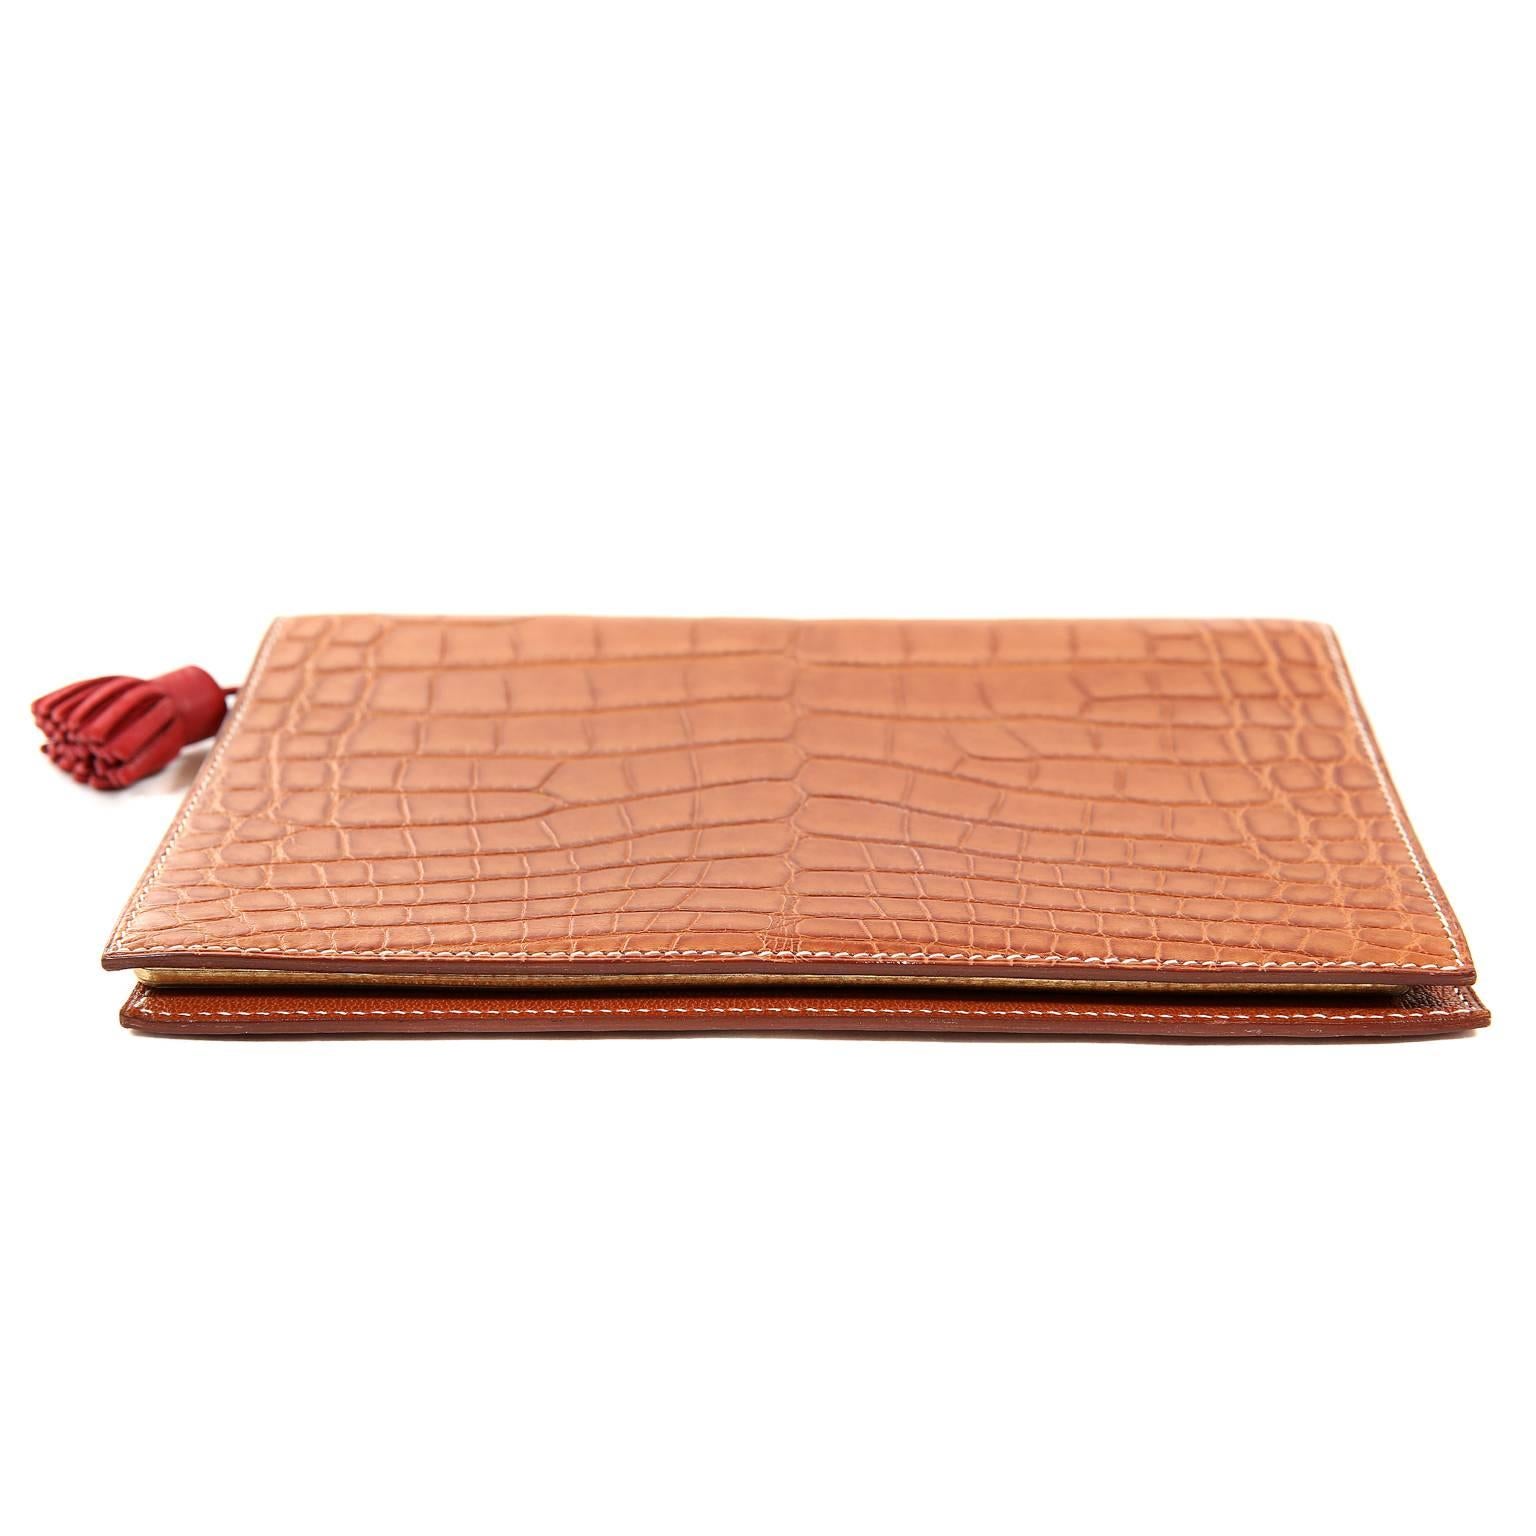 Hermès Barenia Tanned Alligator Agenda Cover- PRISTINE
Alligator is one of the world’s most exclusive leathers.  Only the finest skins are utilized showing every detail. It is the penultimate of luxury items.
Square symbol next to Hermès stamp